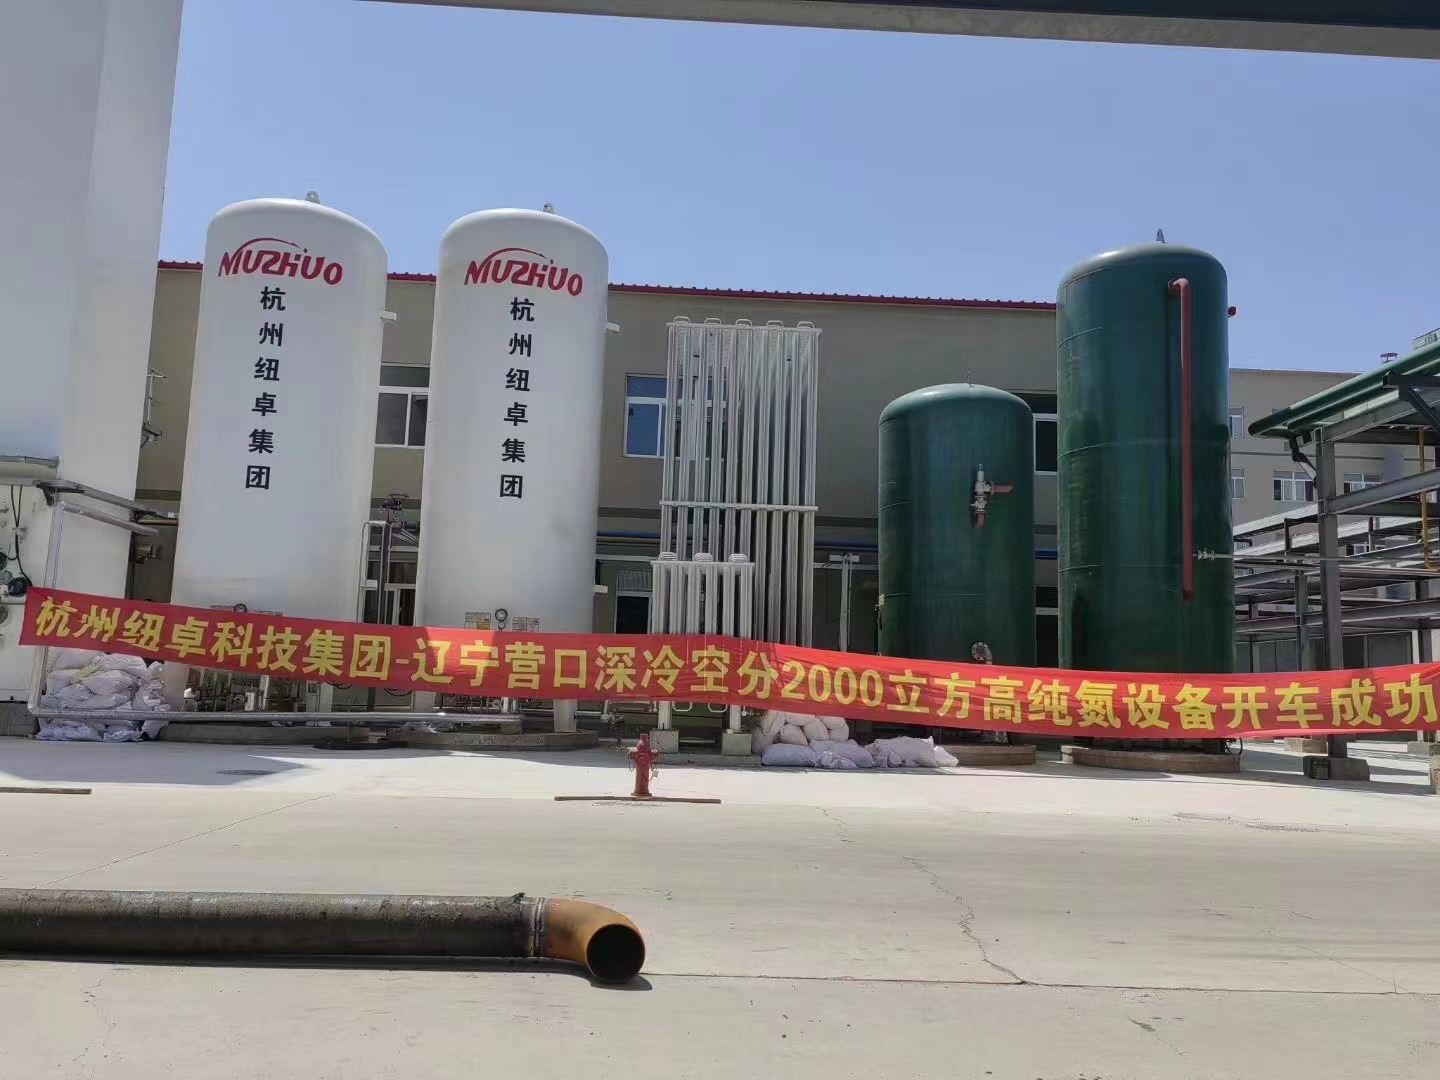 Cooperation Case Between Hangzhou NUZHUO Technology Group CO., LTD and Liaoning DINGJIDE Petrochemical Co., LTD